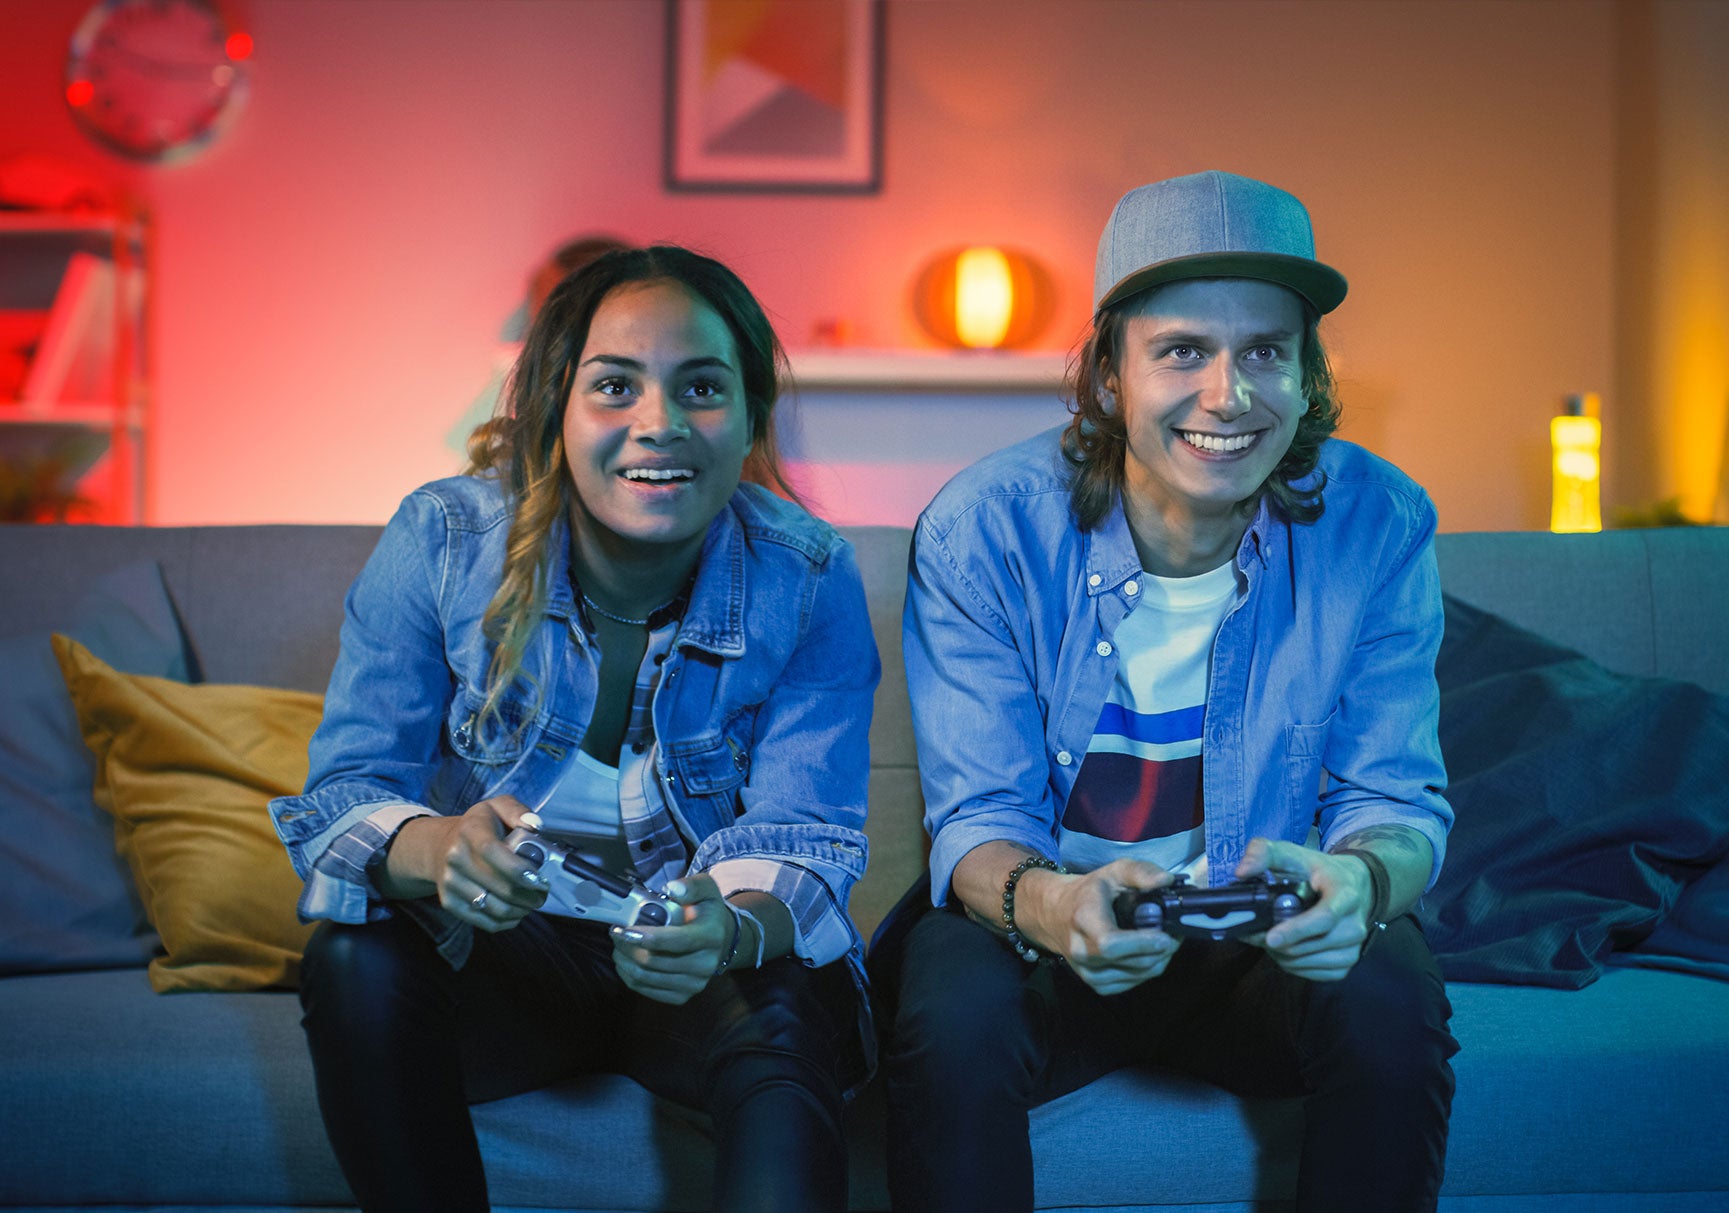 Excited Gamer Girl and Young Man Sitting on a Couch and Playing Video Games on Console. They Plays with Wireless Controllers. Cozy Room is Lit with Warm and Neon Light.